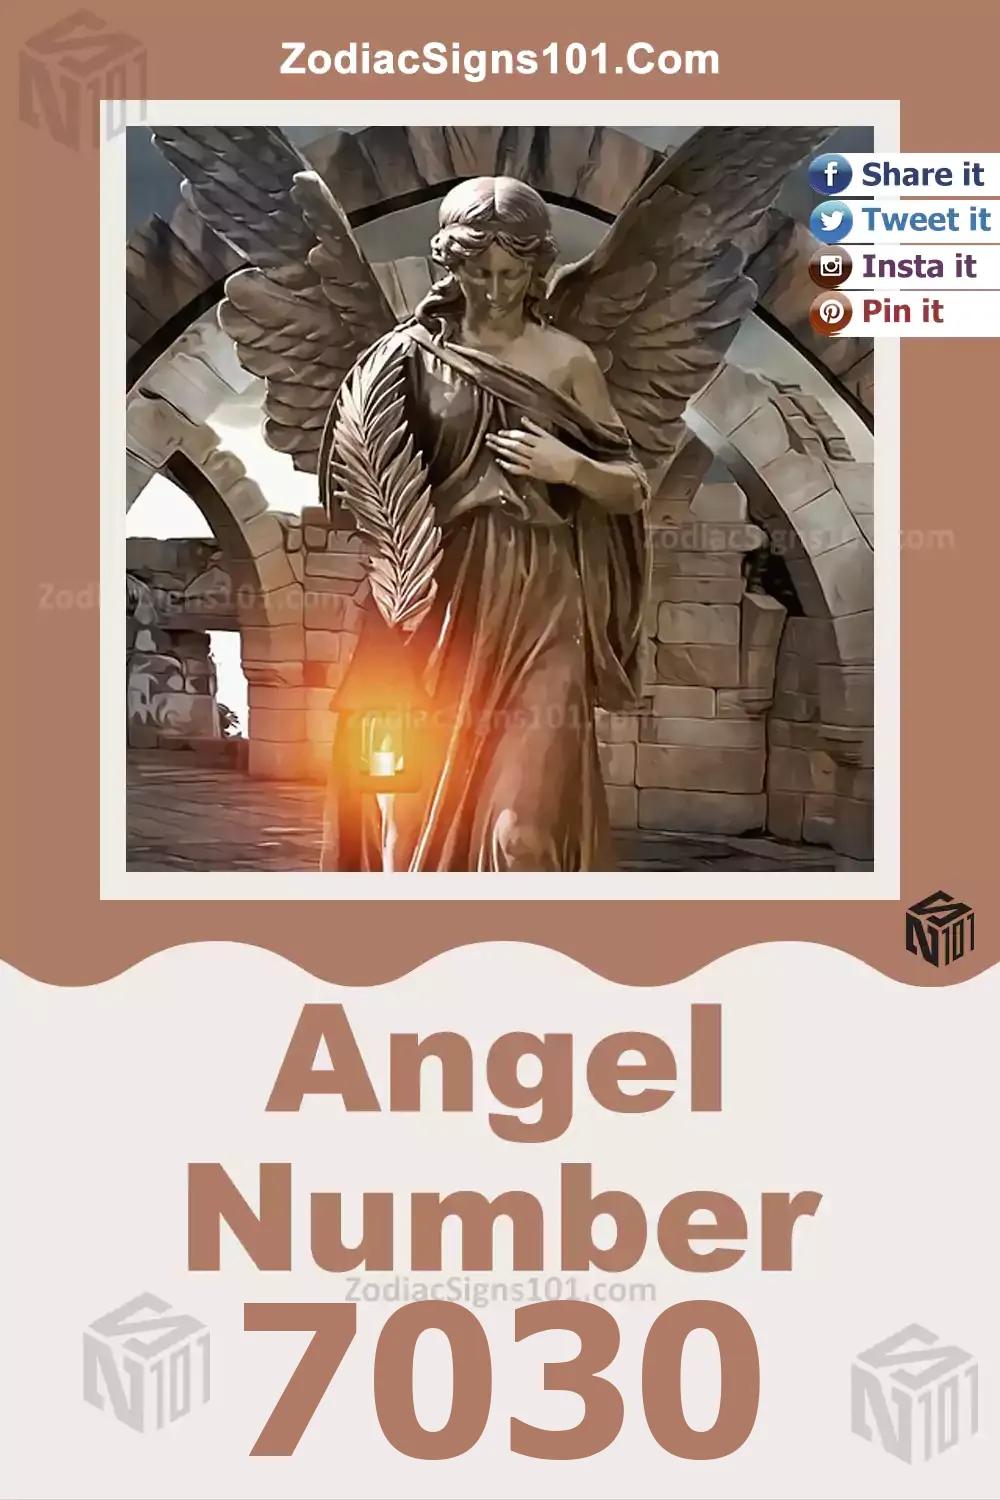 7030 Angel Number Meaning